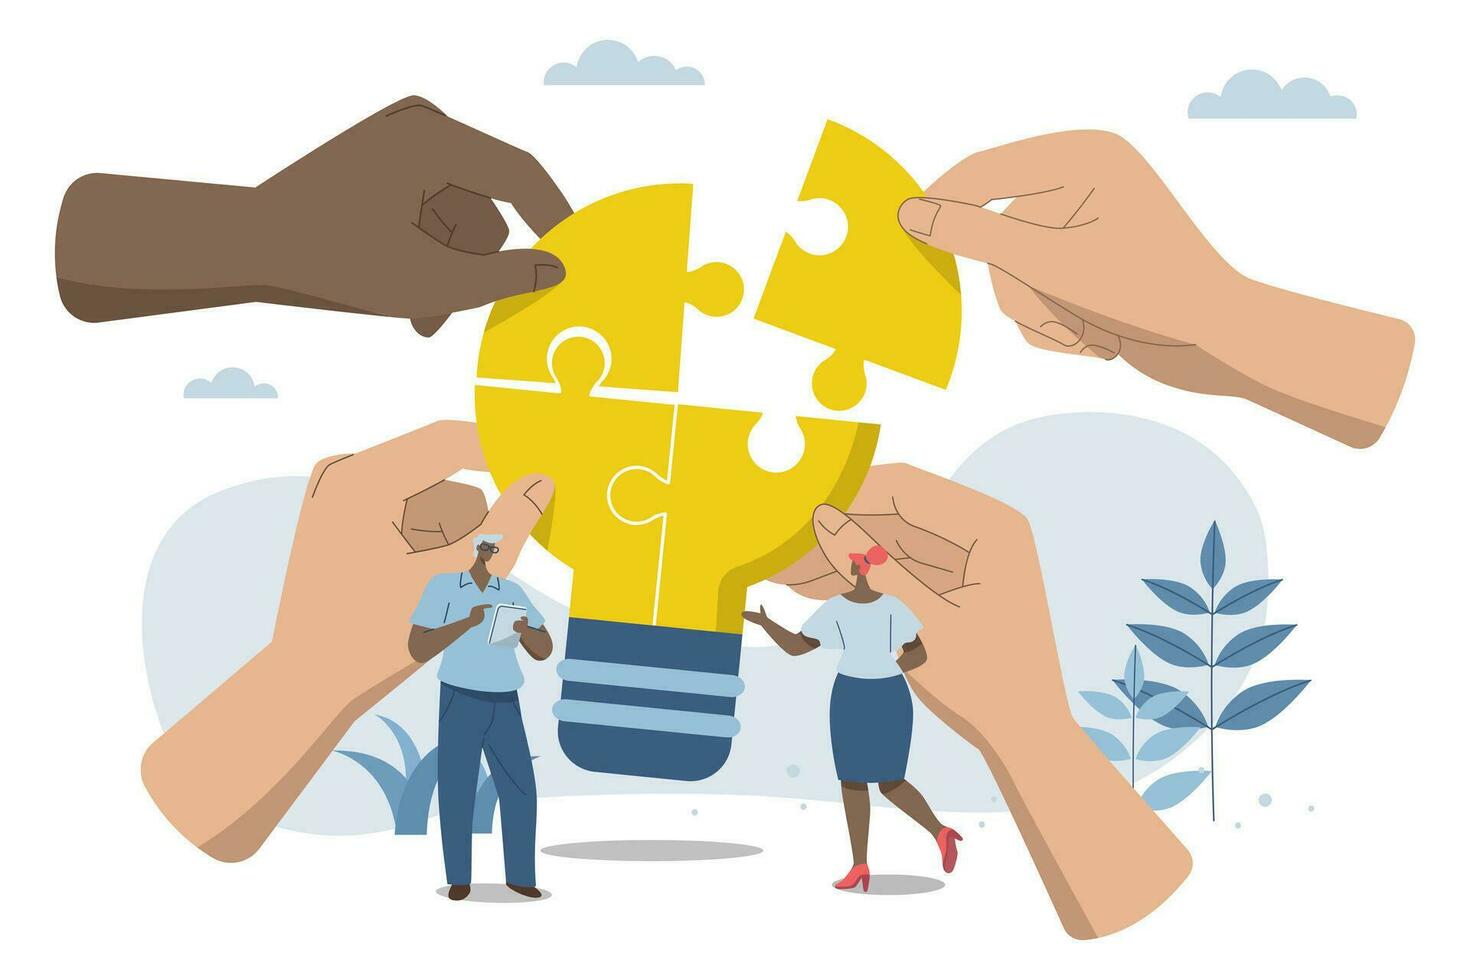 Effective teamwork, problem solving, or ways to improve, career development concept, symbol of teamwork, Big hands work together to complete the light bulb jigsaw puzzle in harmony. vector